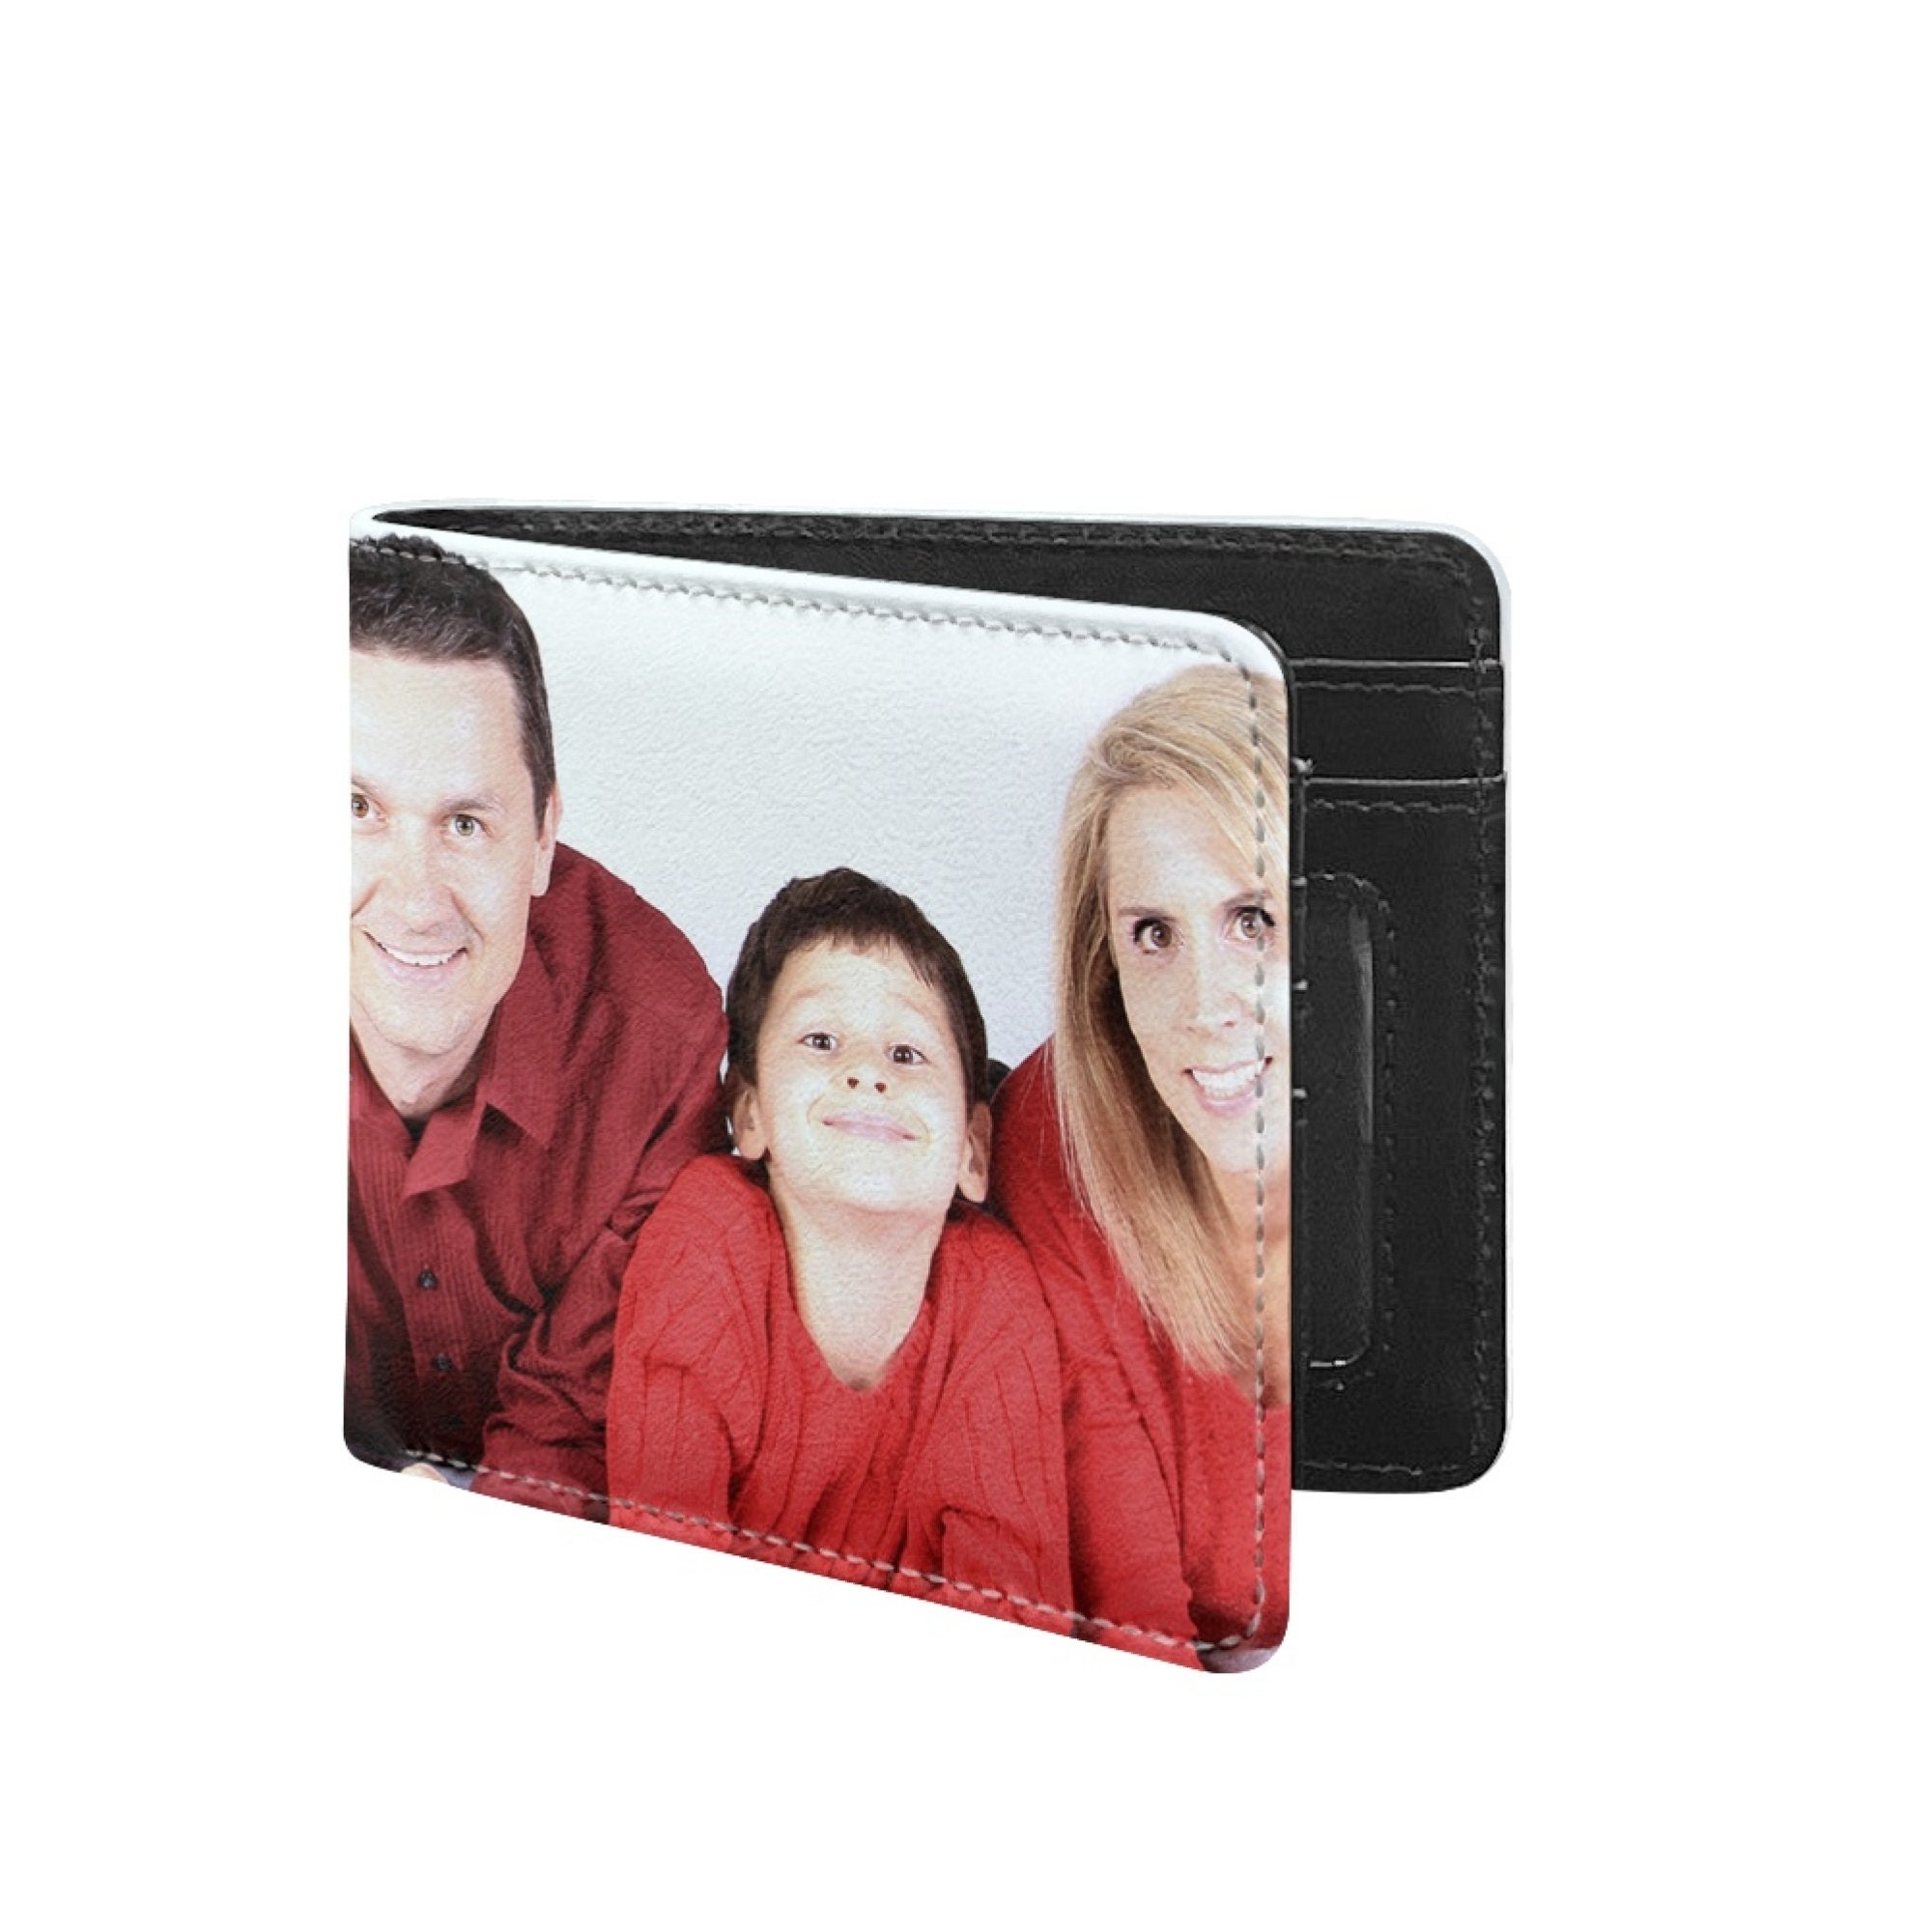 Personalized Wallet Card, Wallet Insert Photo, Custom Gift